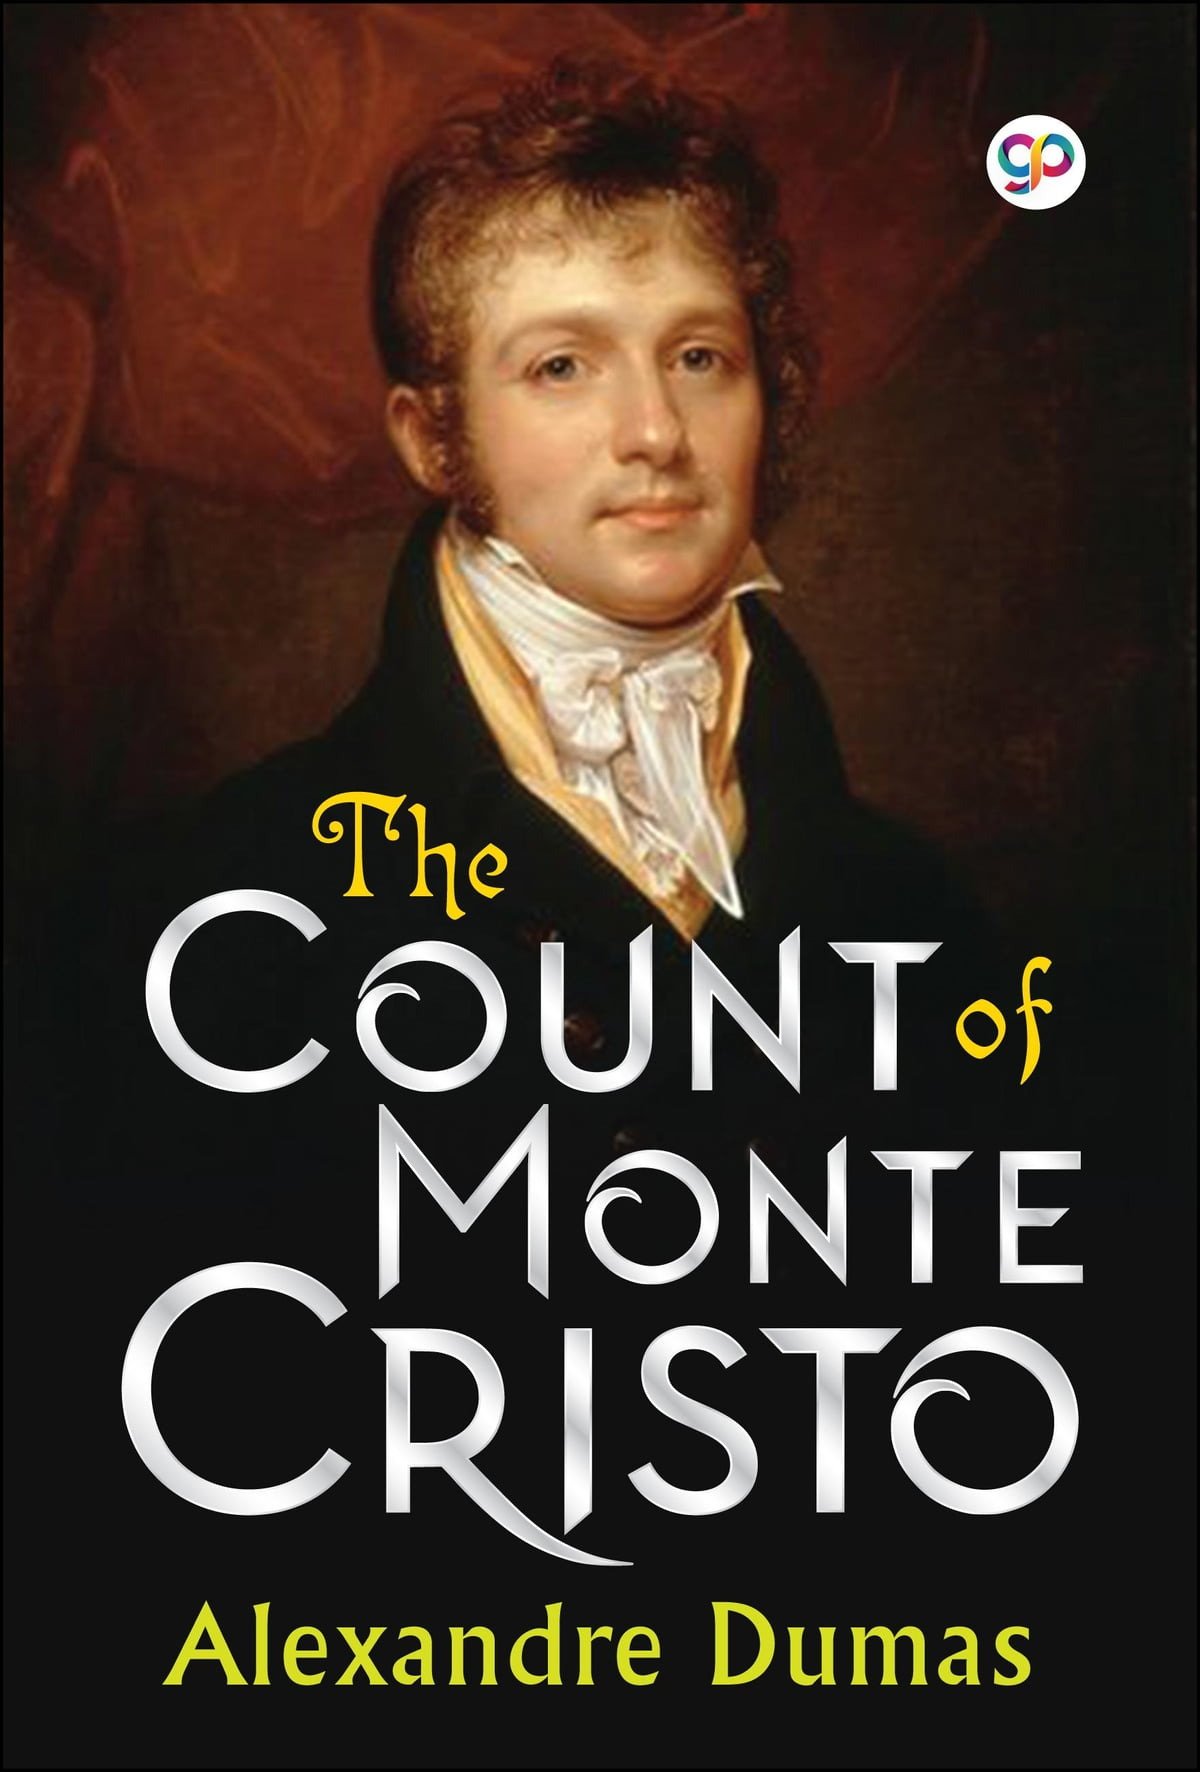 Book Review: The Count of Monte Cristo